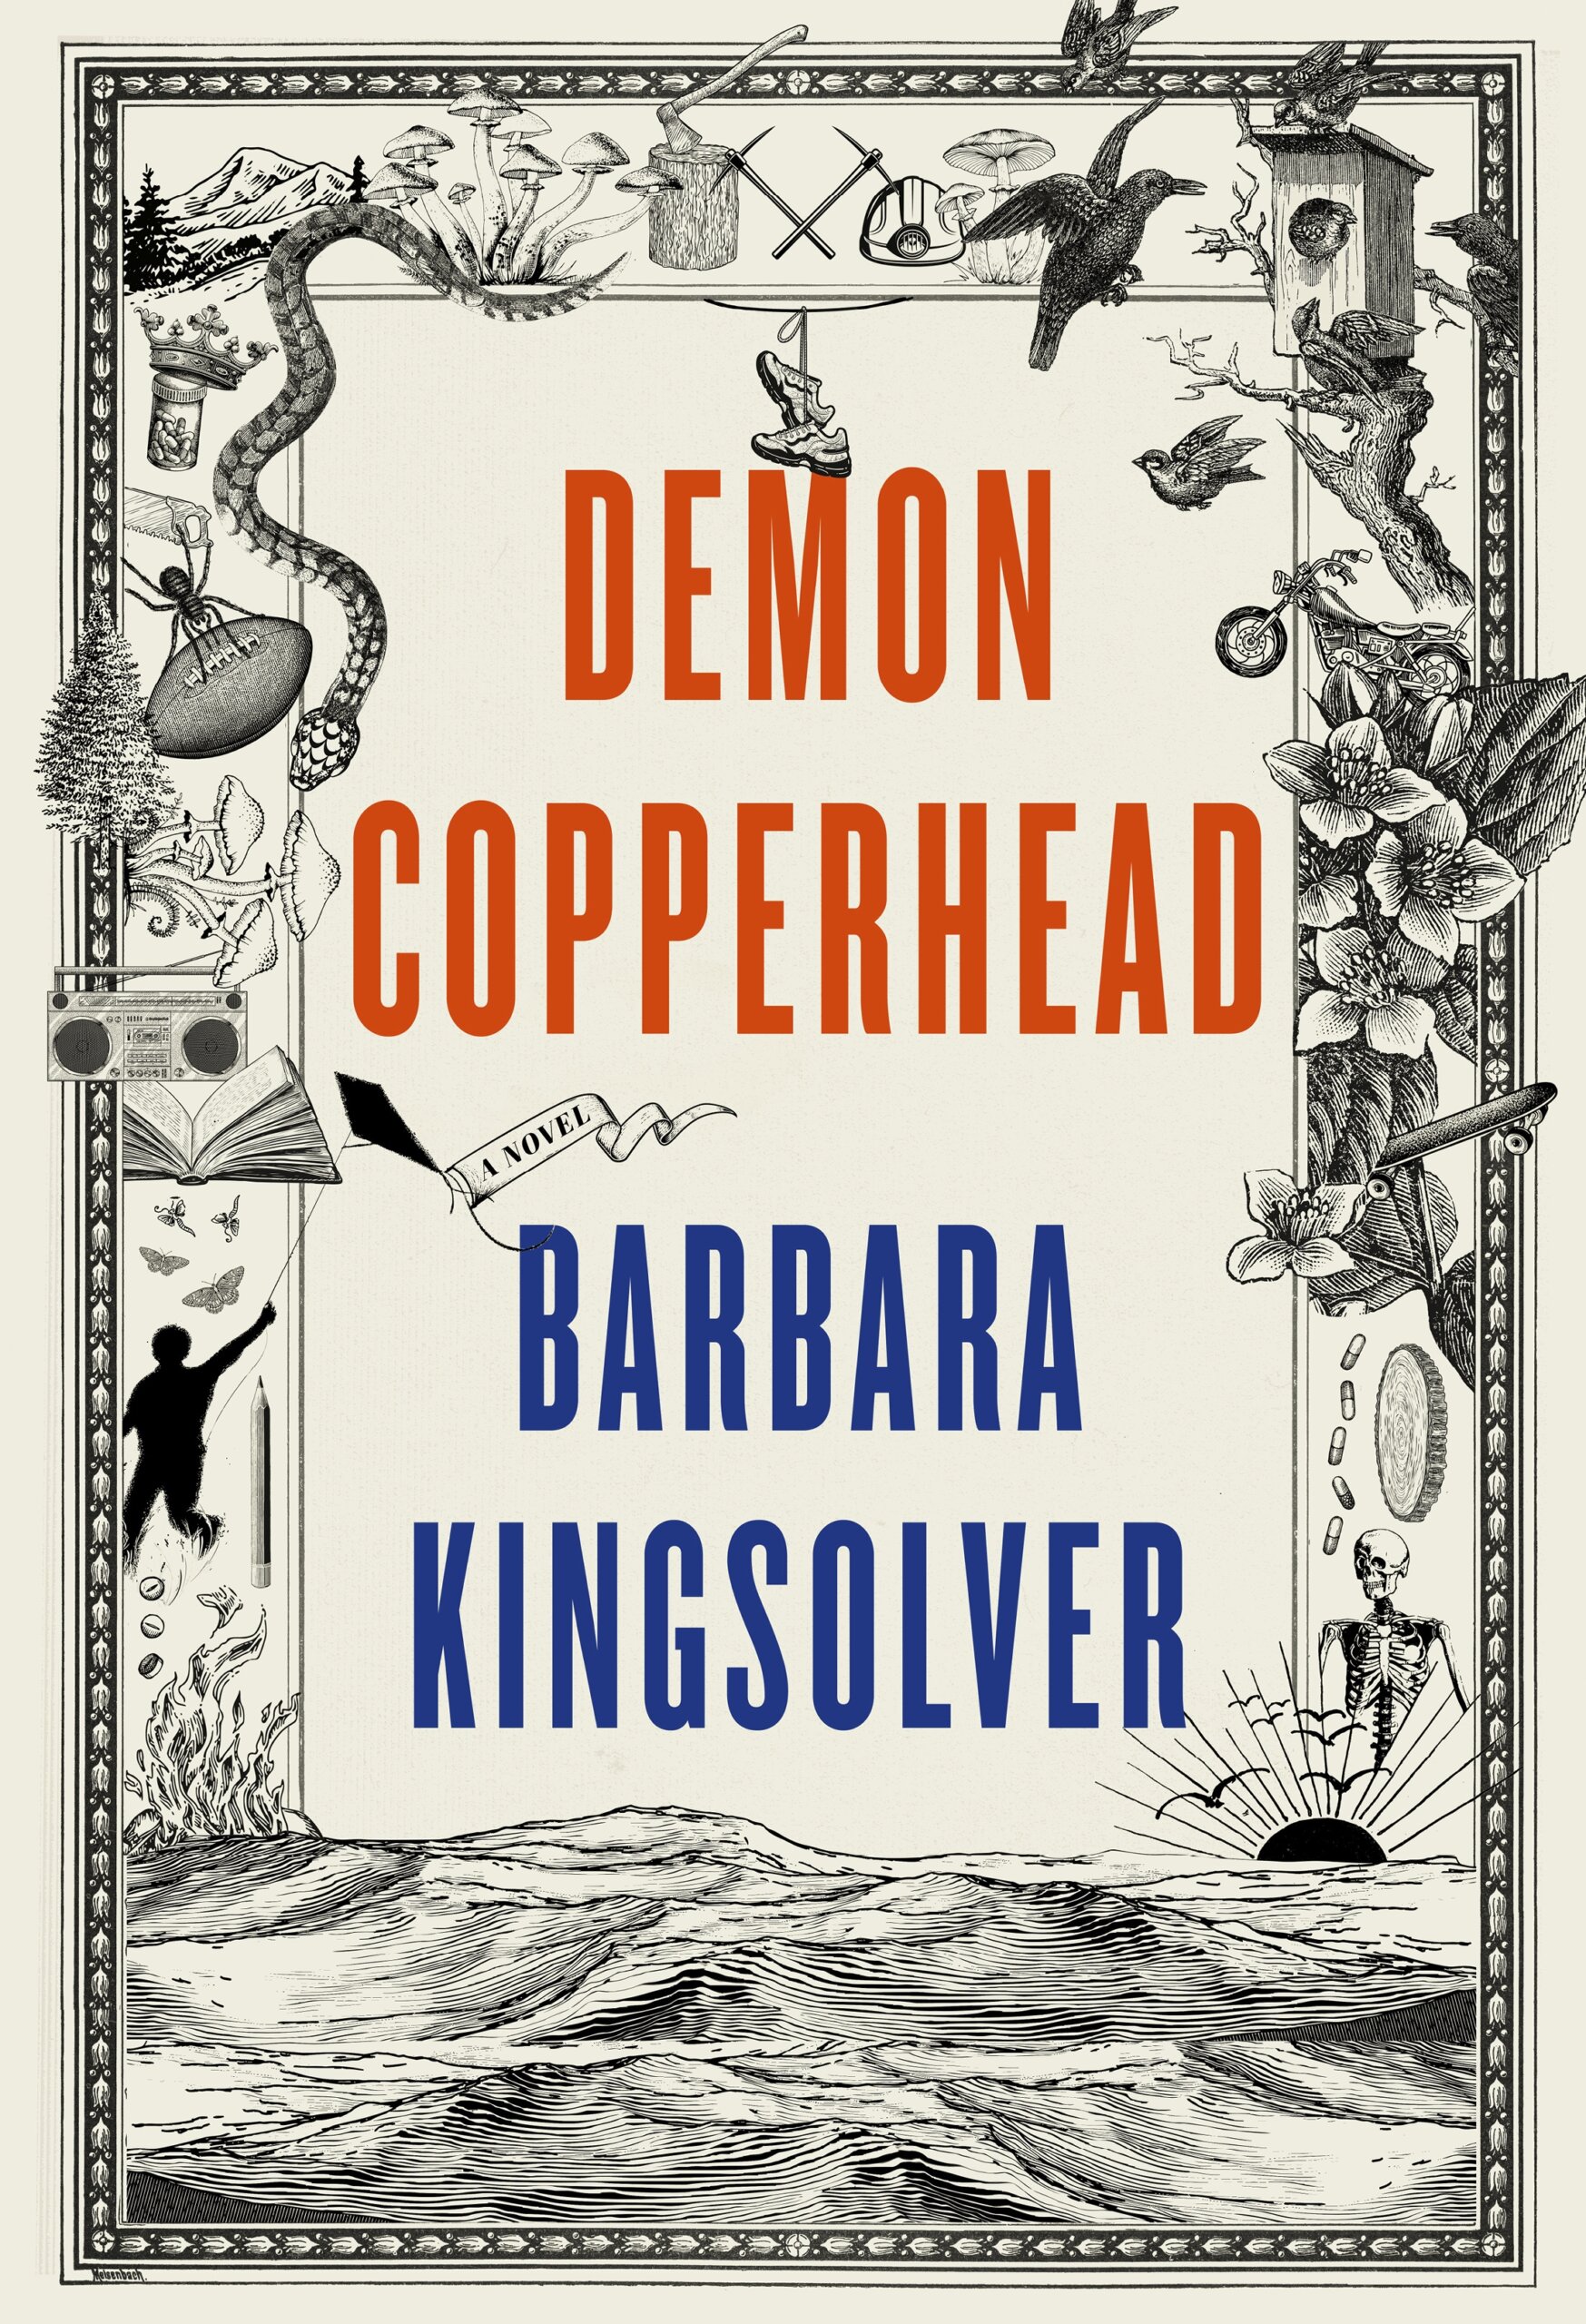 book reviews demon copperfield